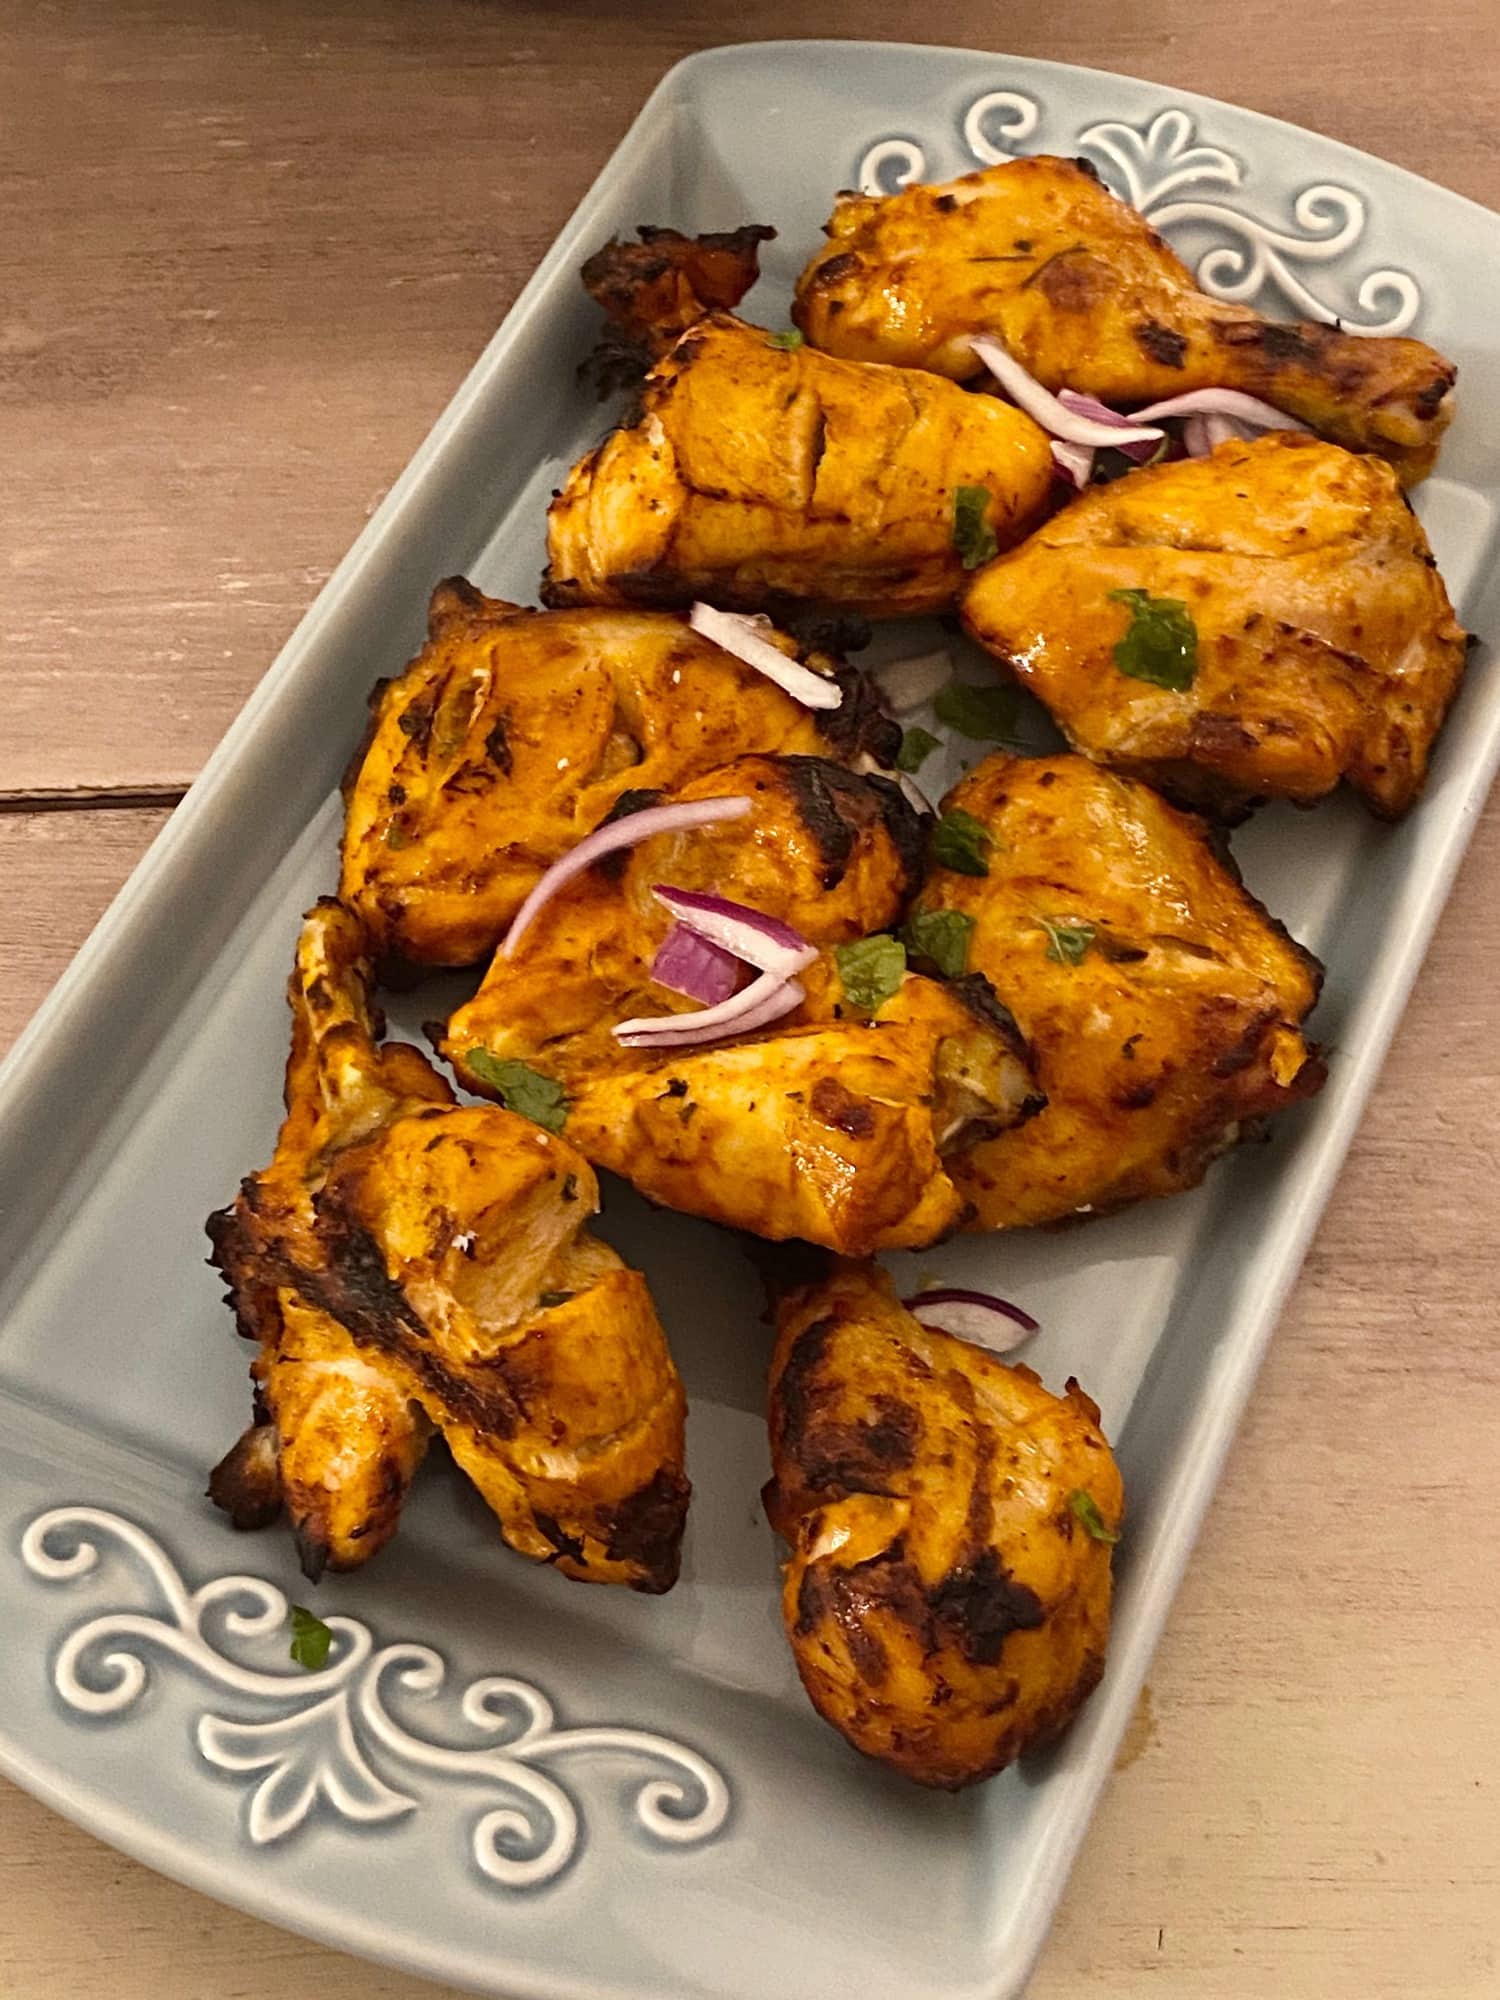 Tandoori chicken garnished with red onions, on a blue platter.